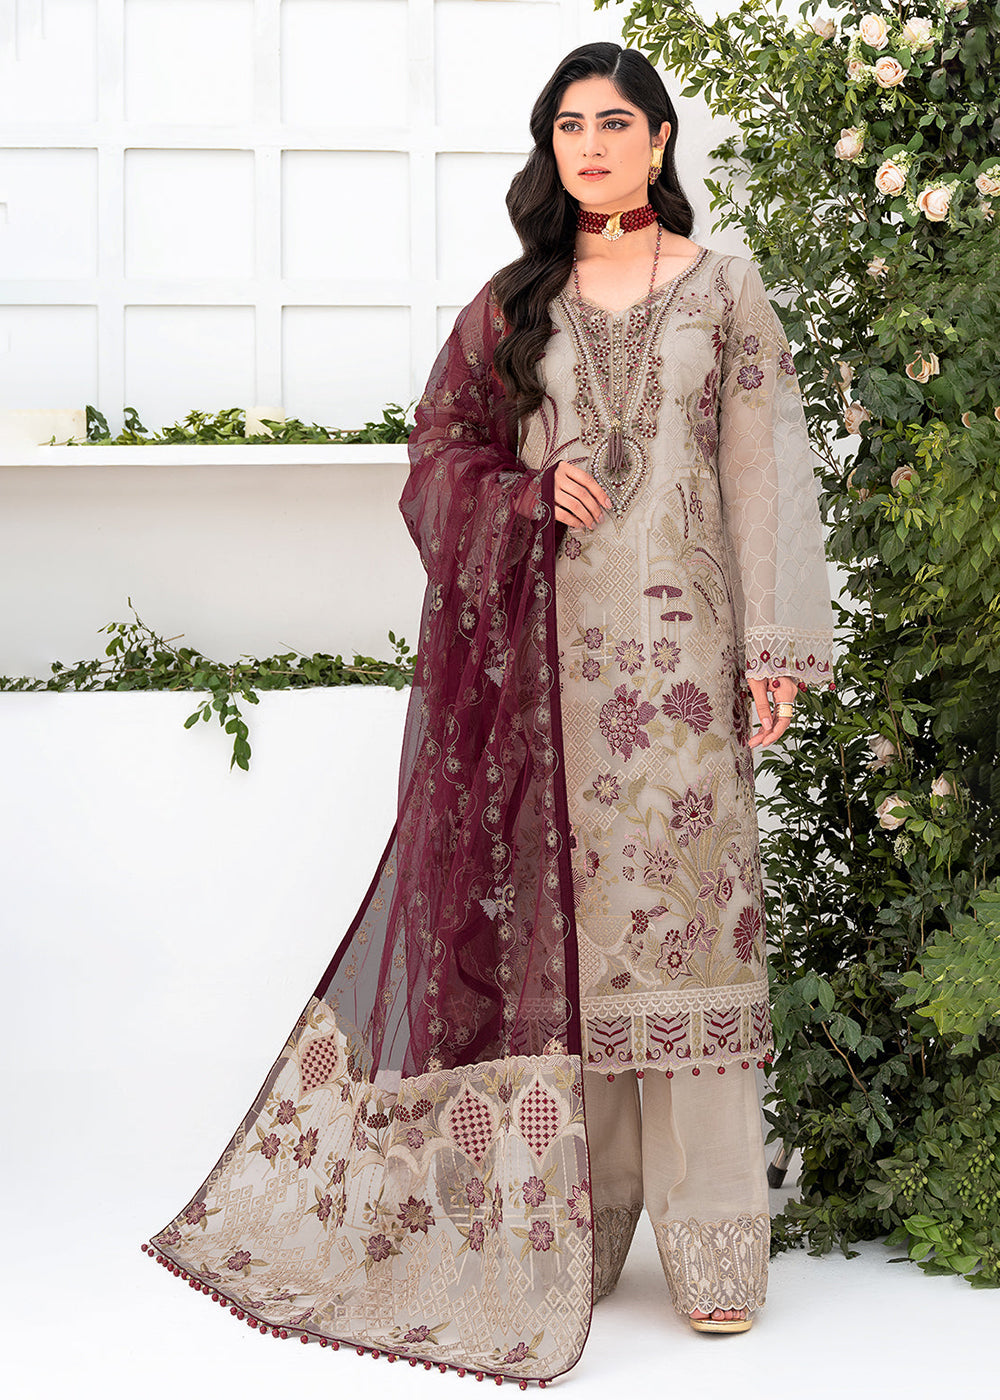 Buy Now Beige Organza Suit - Ramsha Minhal Collection Vol 8 - #M-806 Online in USA, UK, Canada & Worldwide at Empress Clothing. 